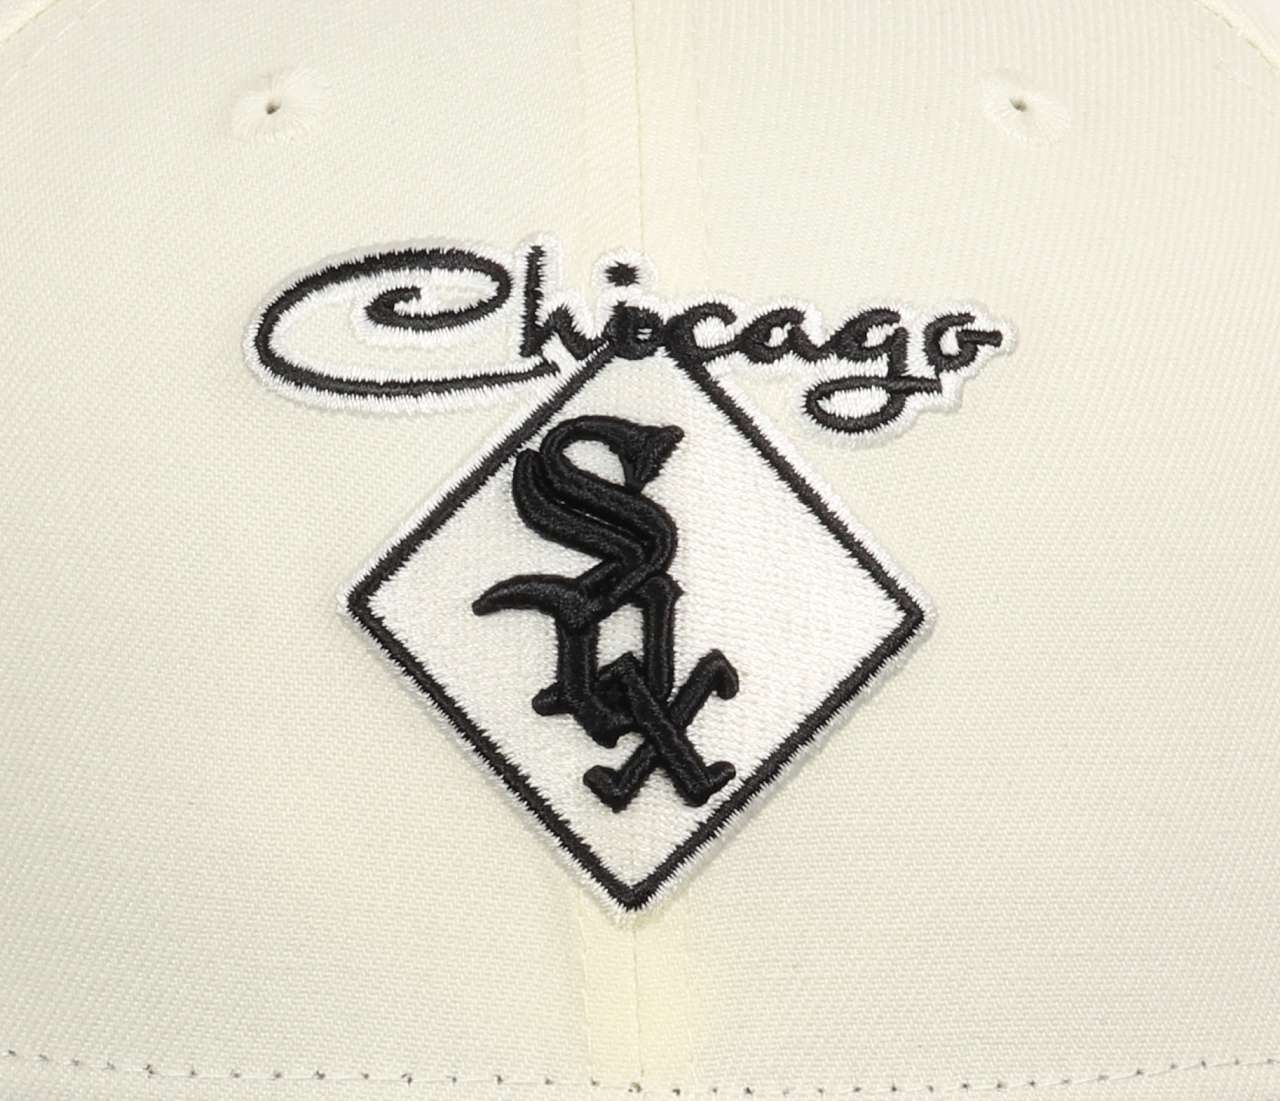 Chicago White Sox MLB Two Tone Cooperstown Chrome Black Wool 59Fifty Basecap New Era